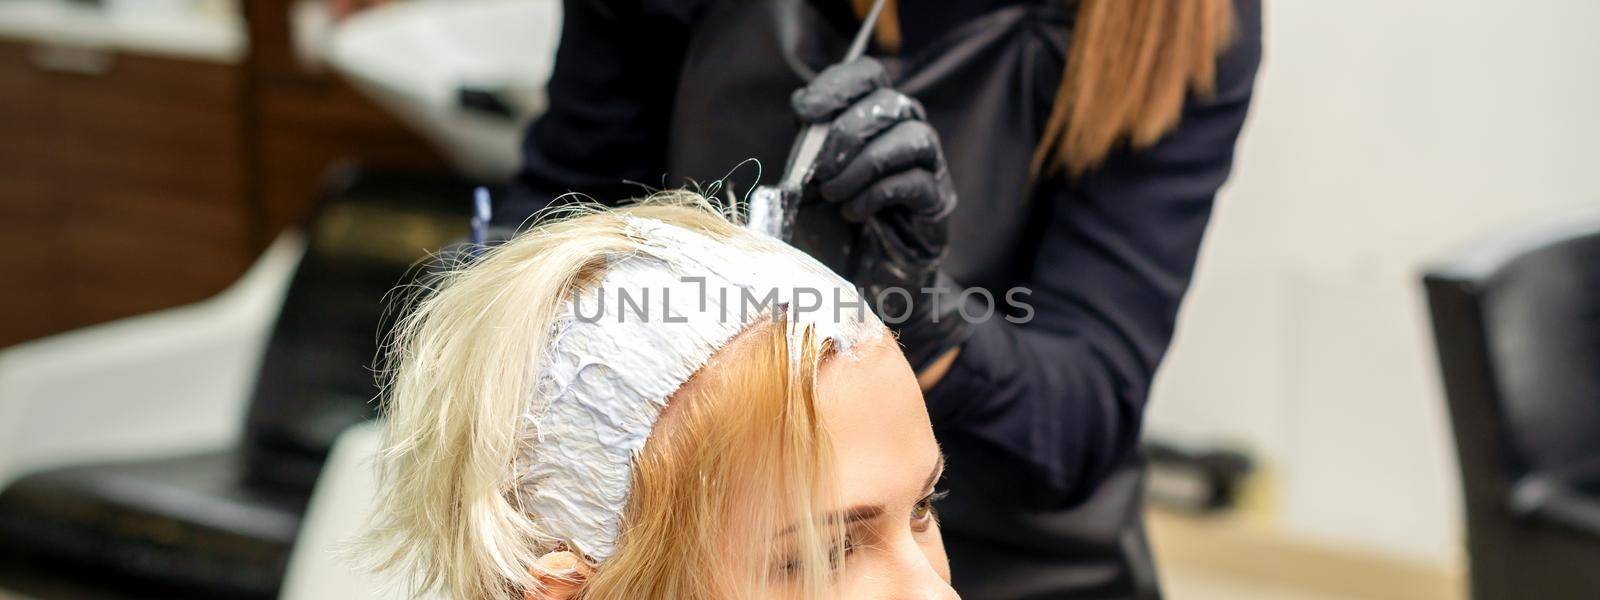 Female hair stylist applies white dye to hair of young female client in hair salon